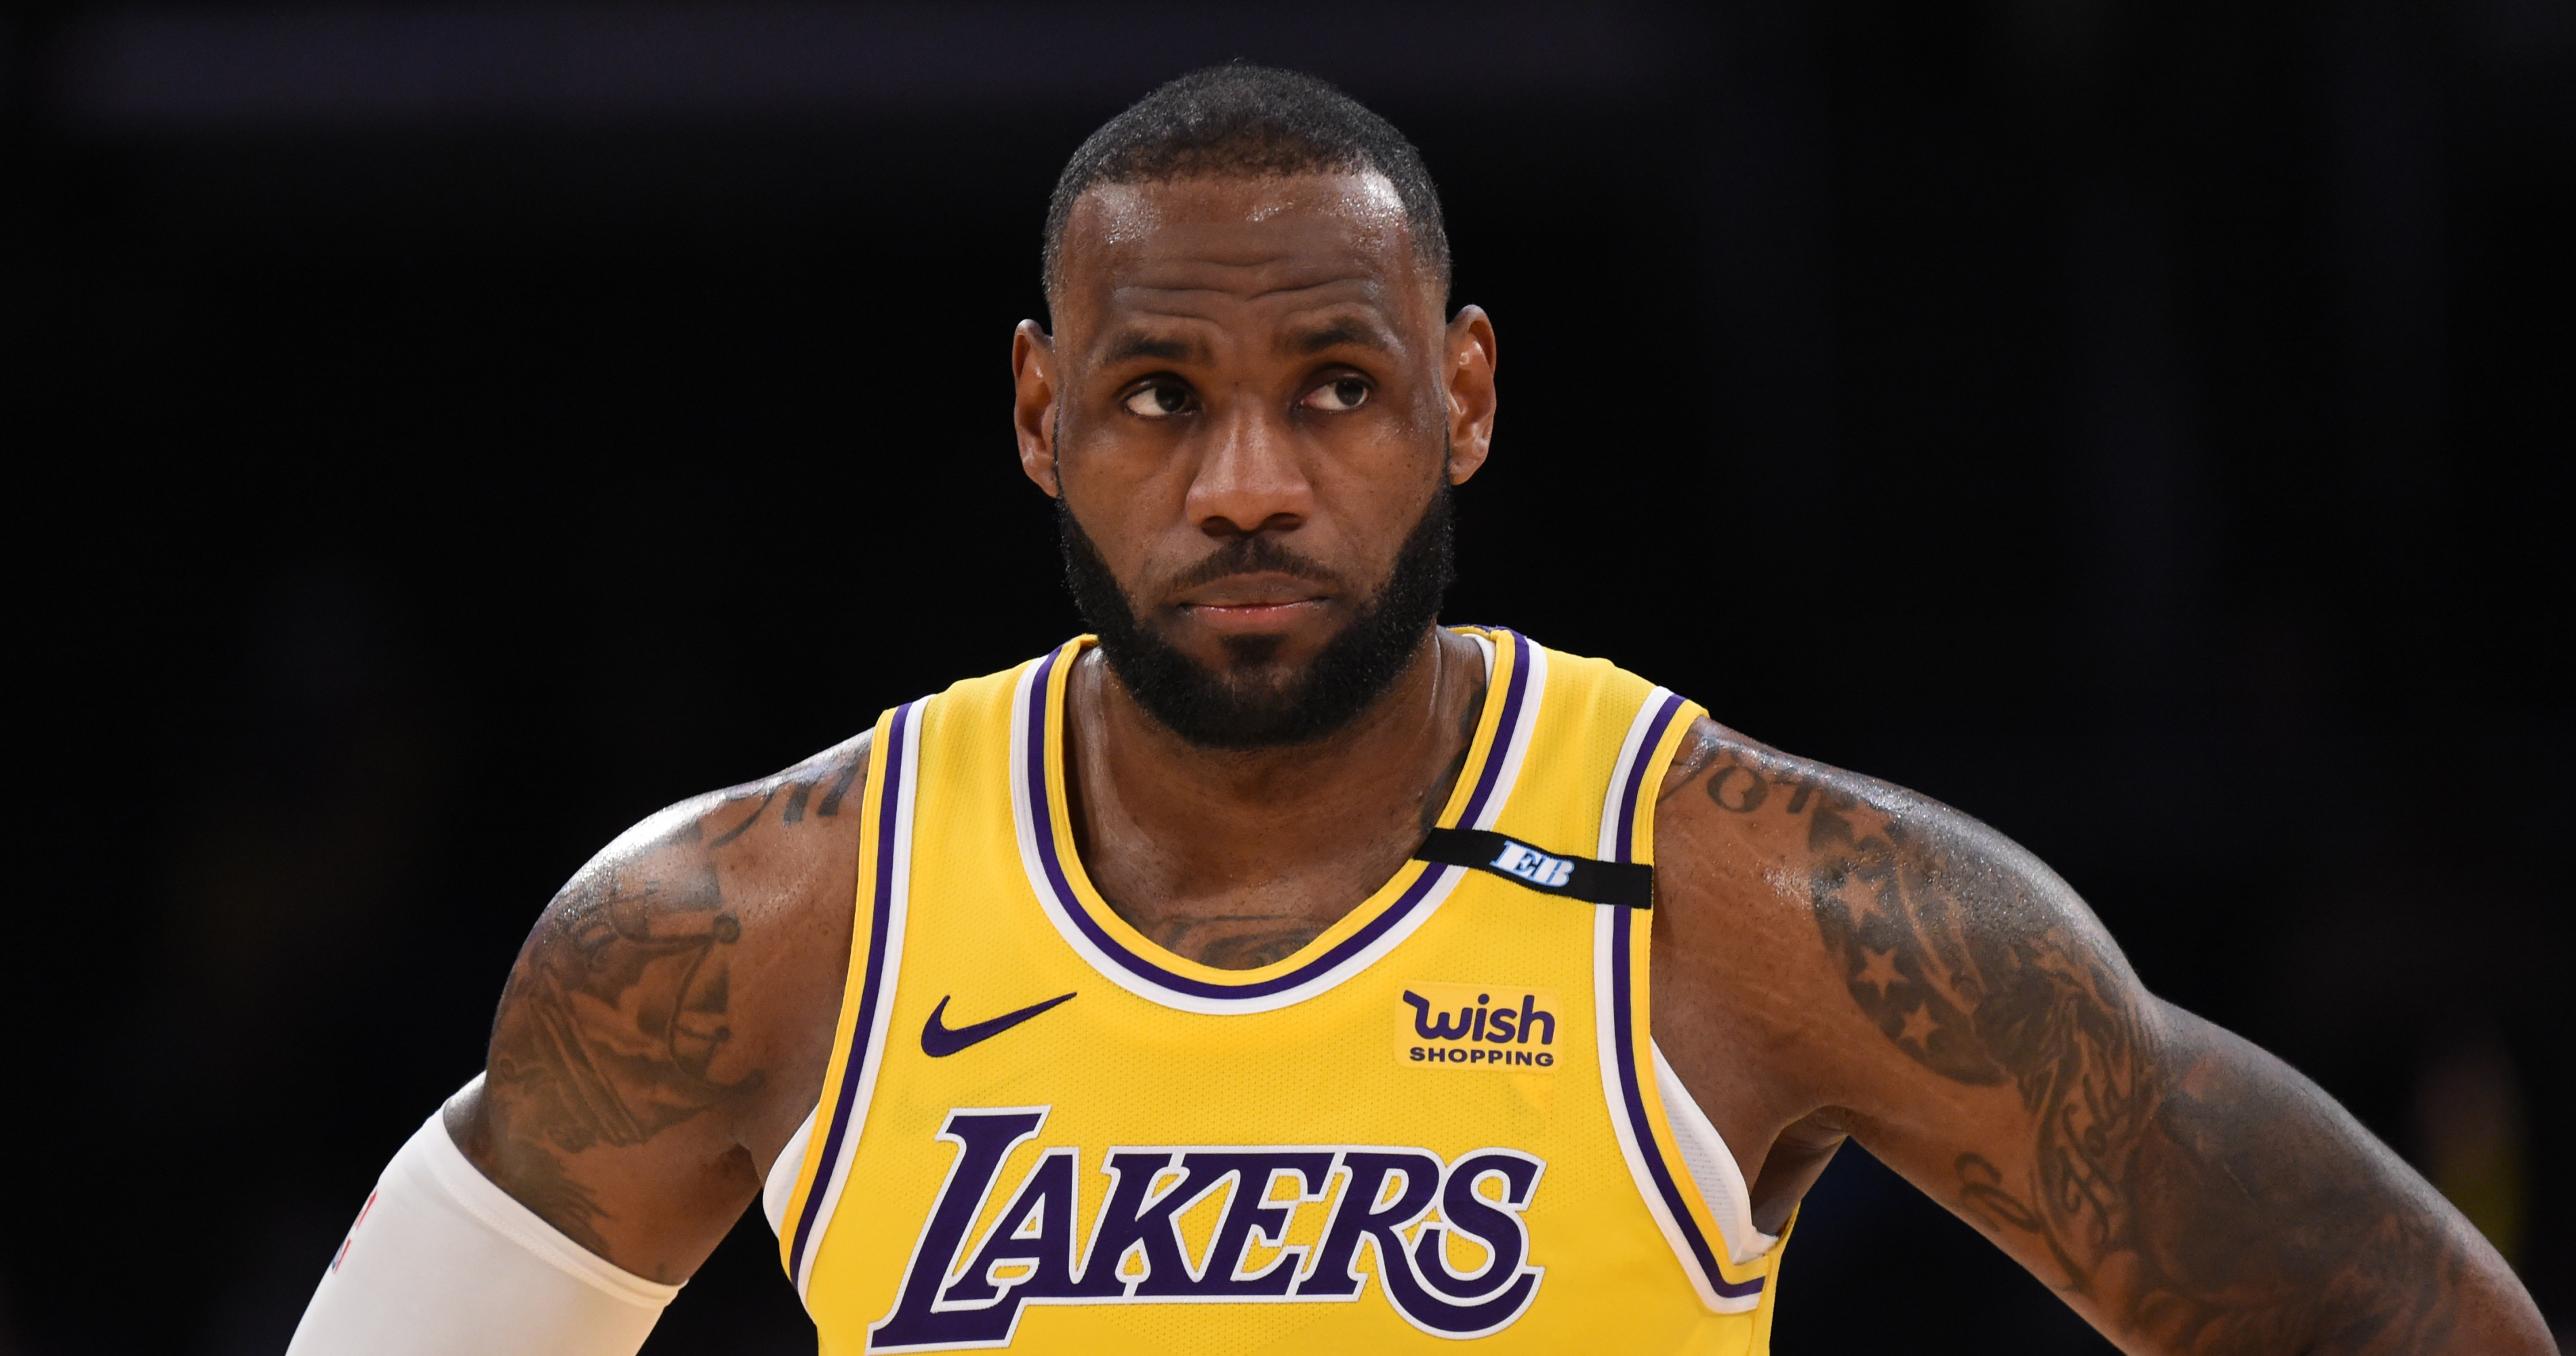 LeBron James Quotes Mike Tyson After Lakers' Win vs. Stephen Curry ...